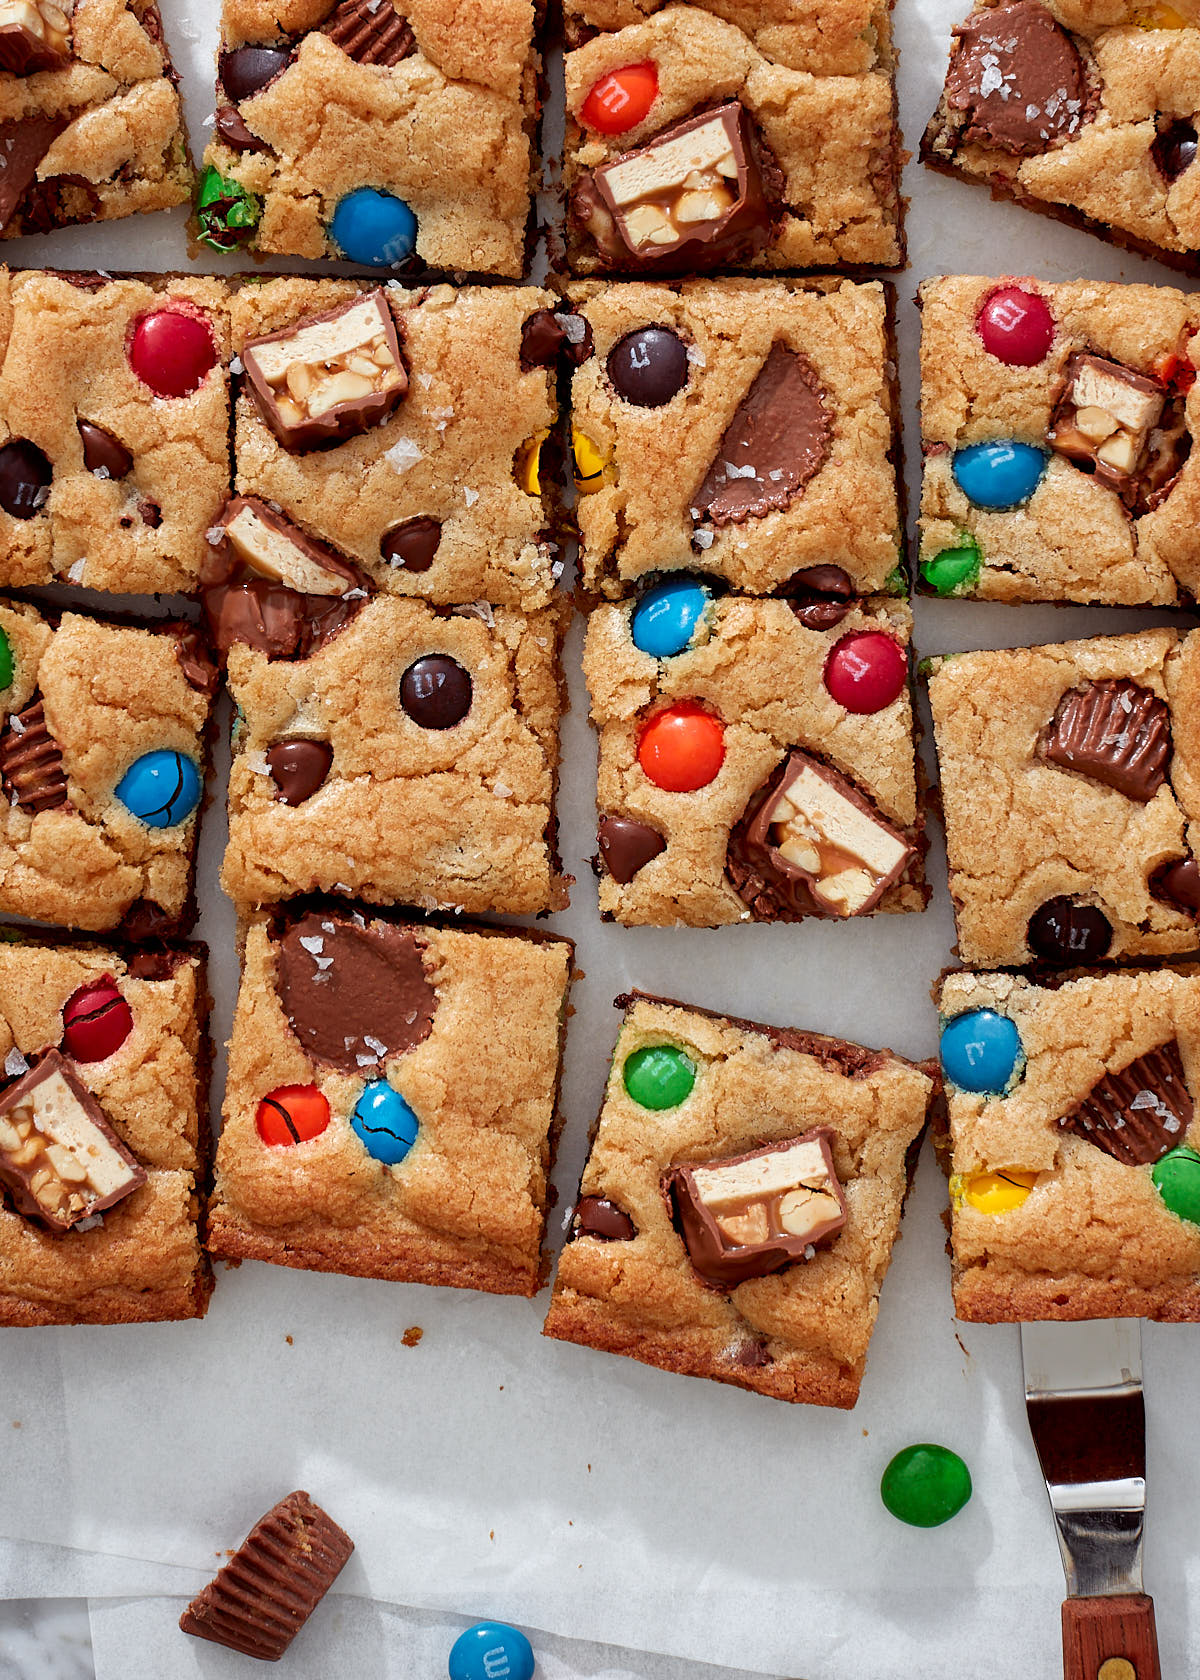 Candy bar blondies, with M&Ms, Snickers, and Reese's peanut butter cups on white parchment paper.